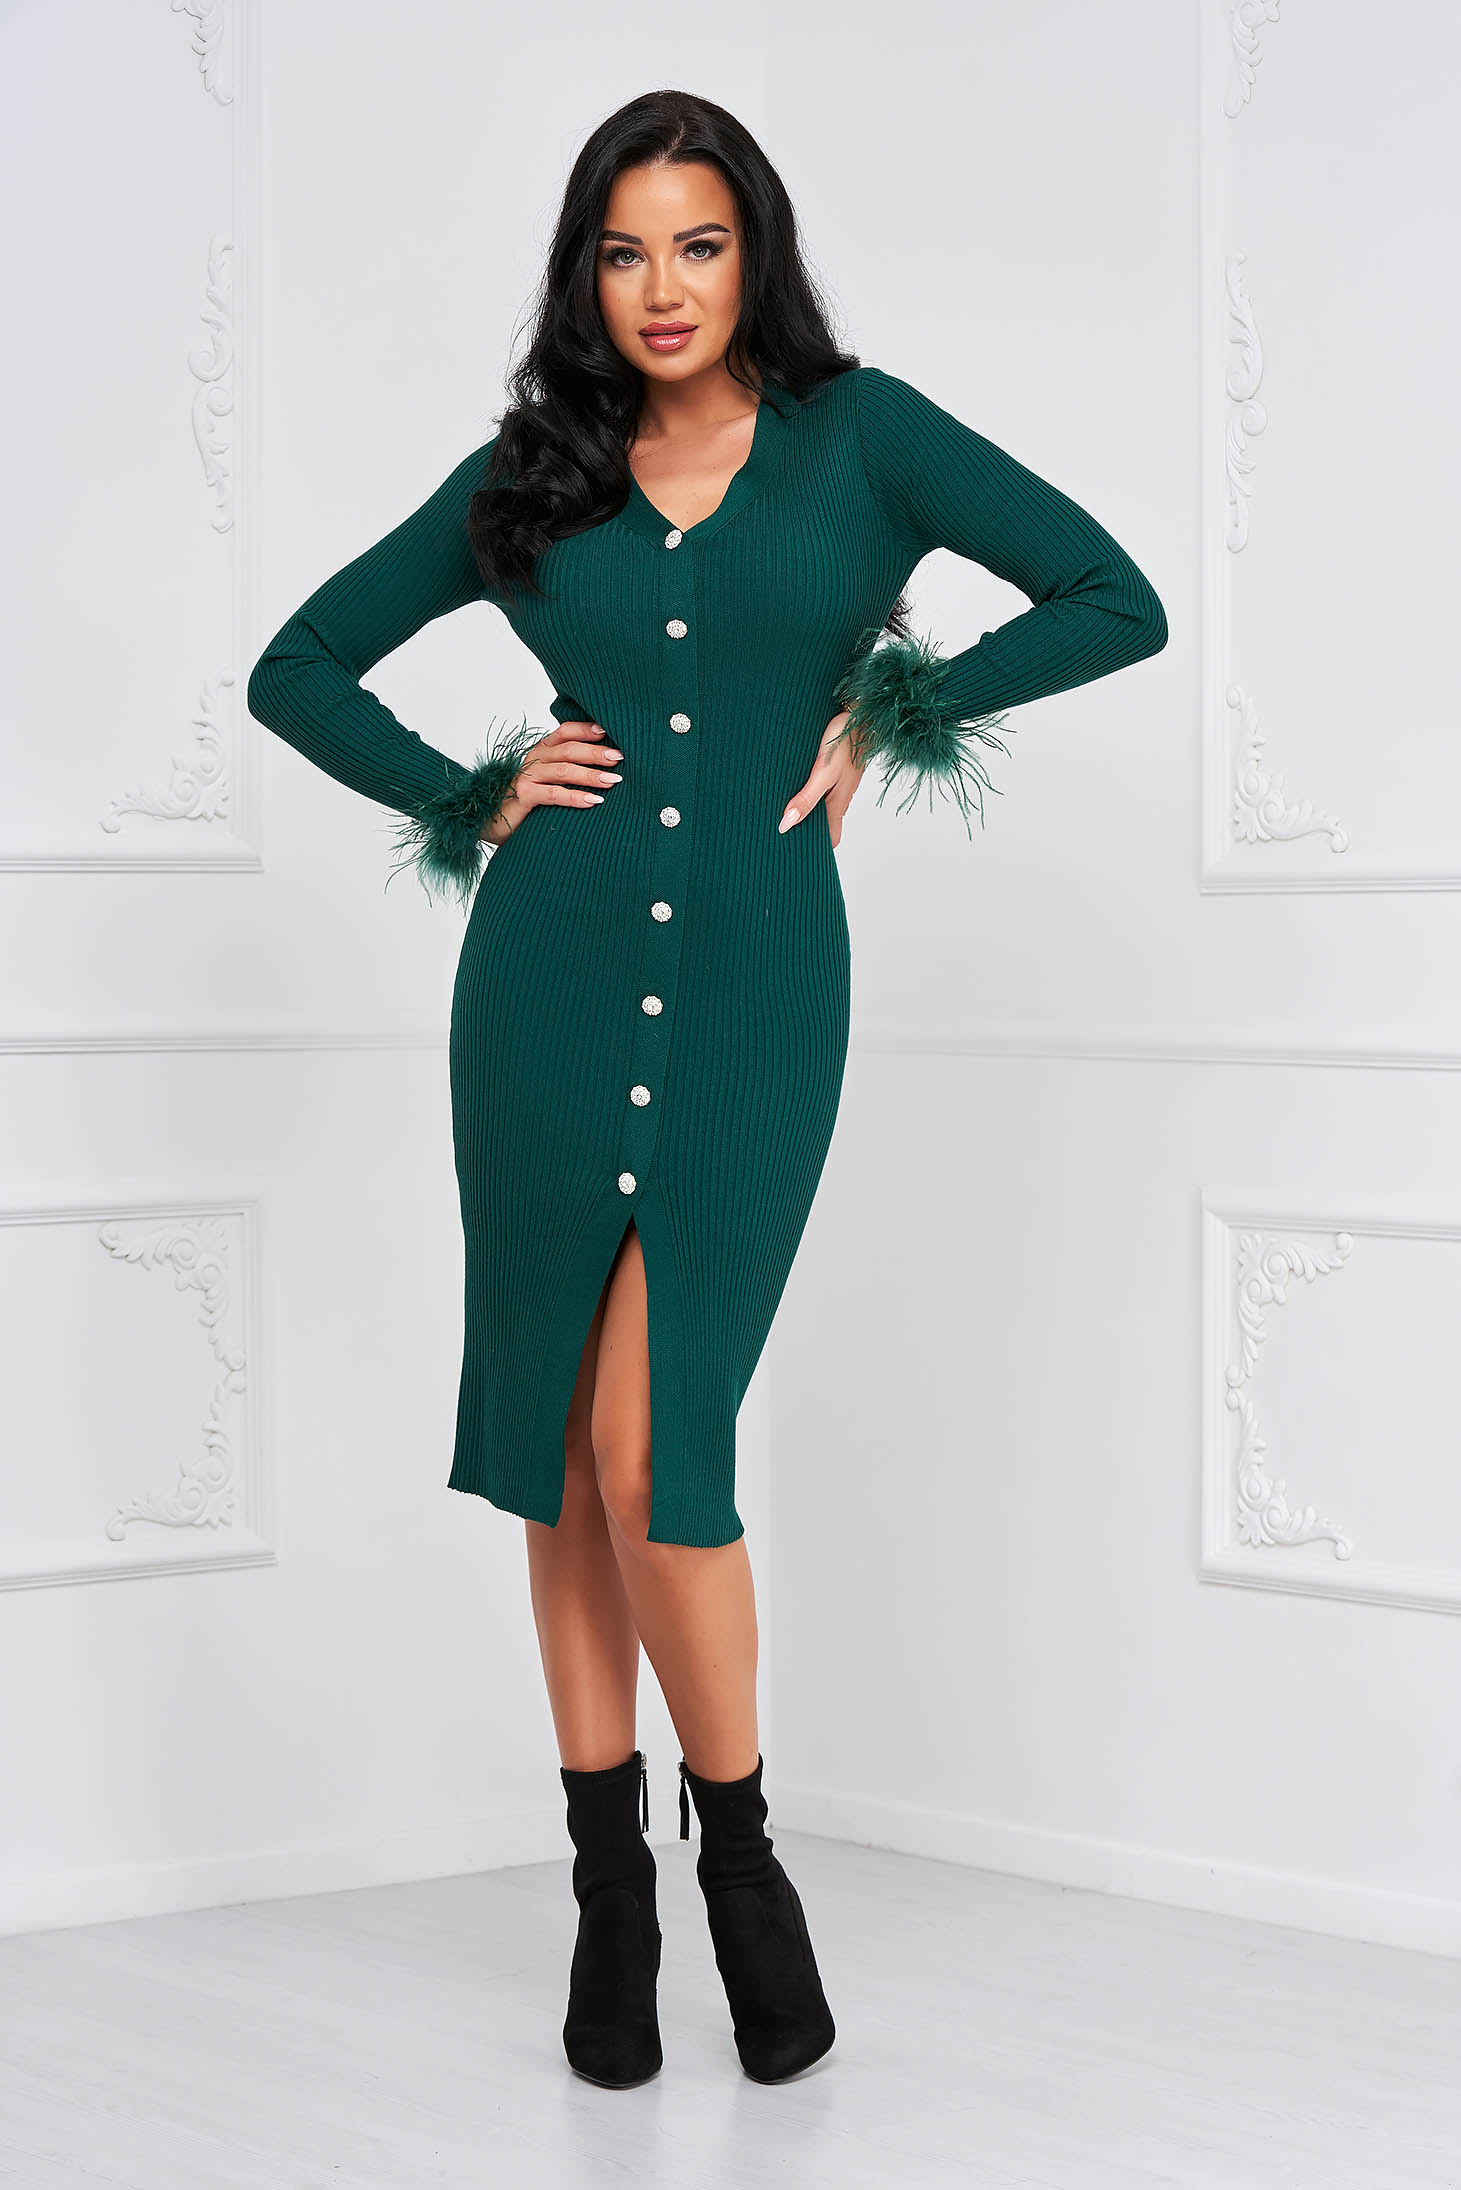 Darkgreen dress knitted midi feather details from striped fabric pencil